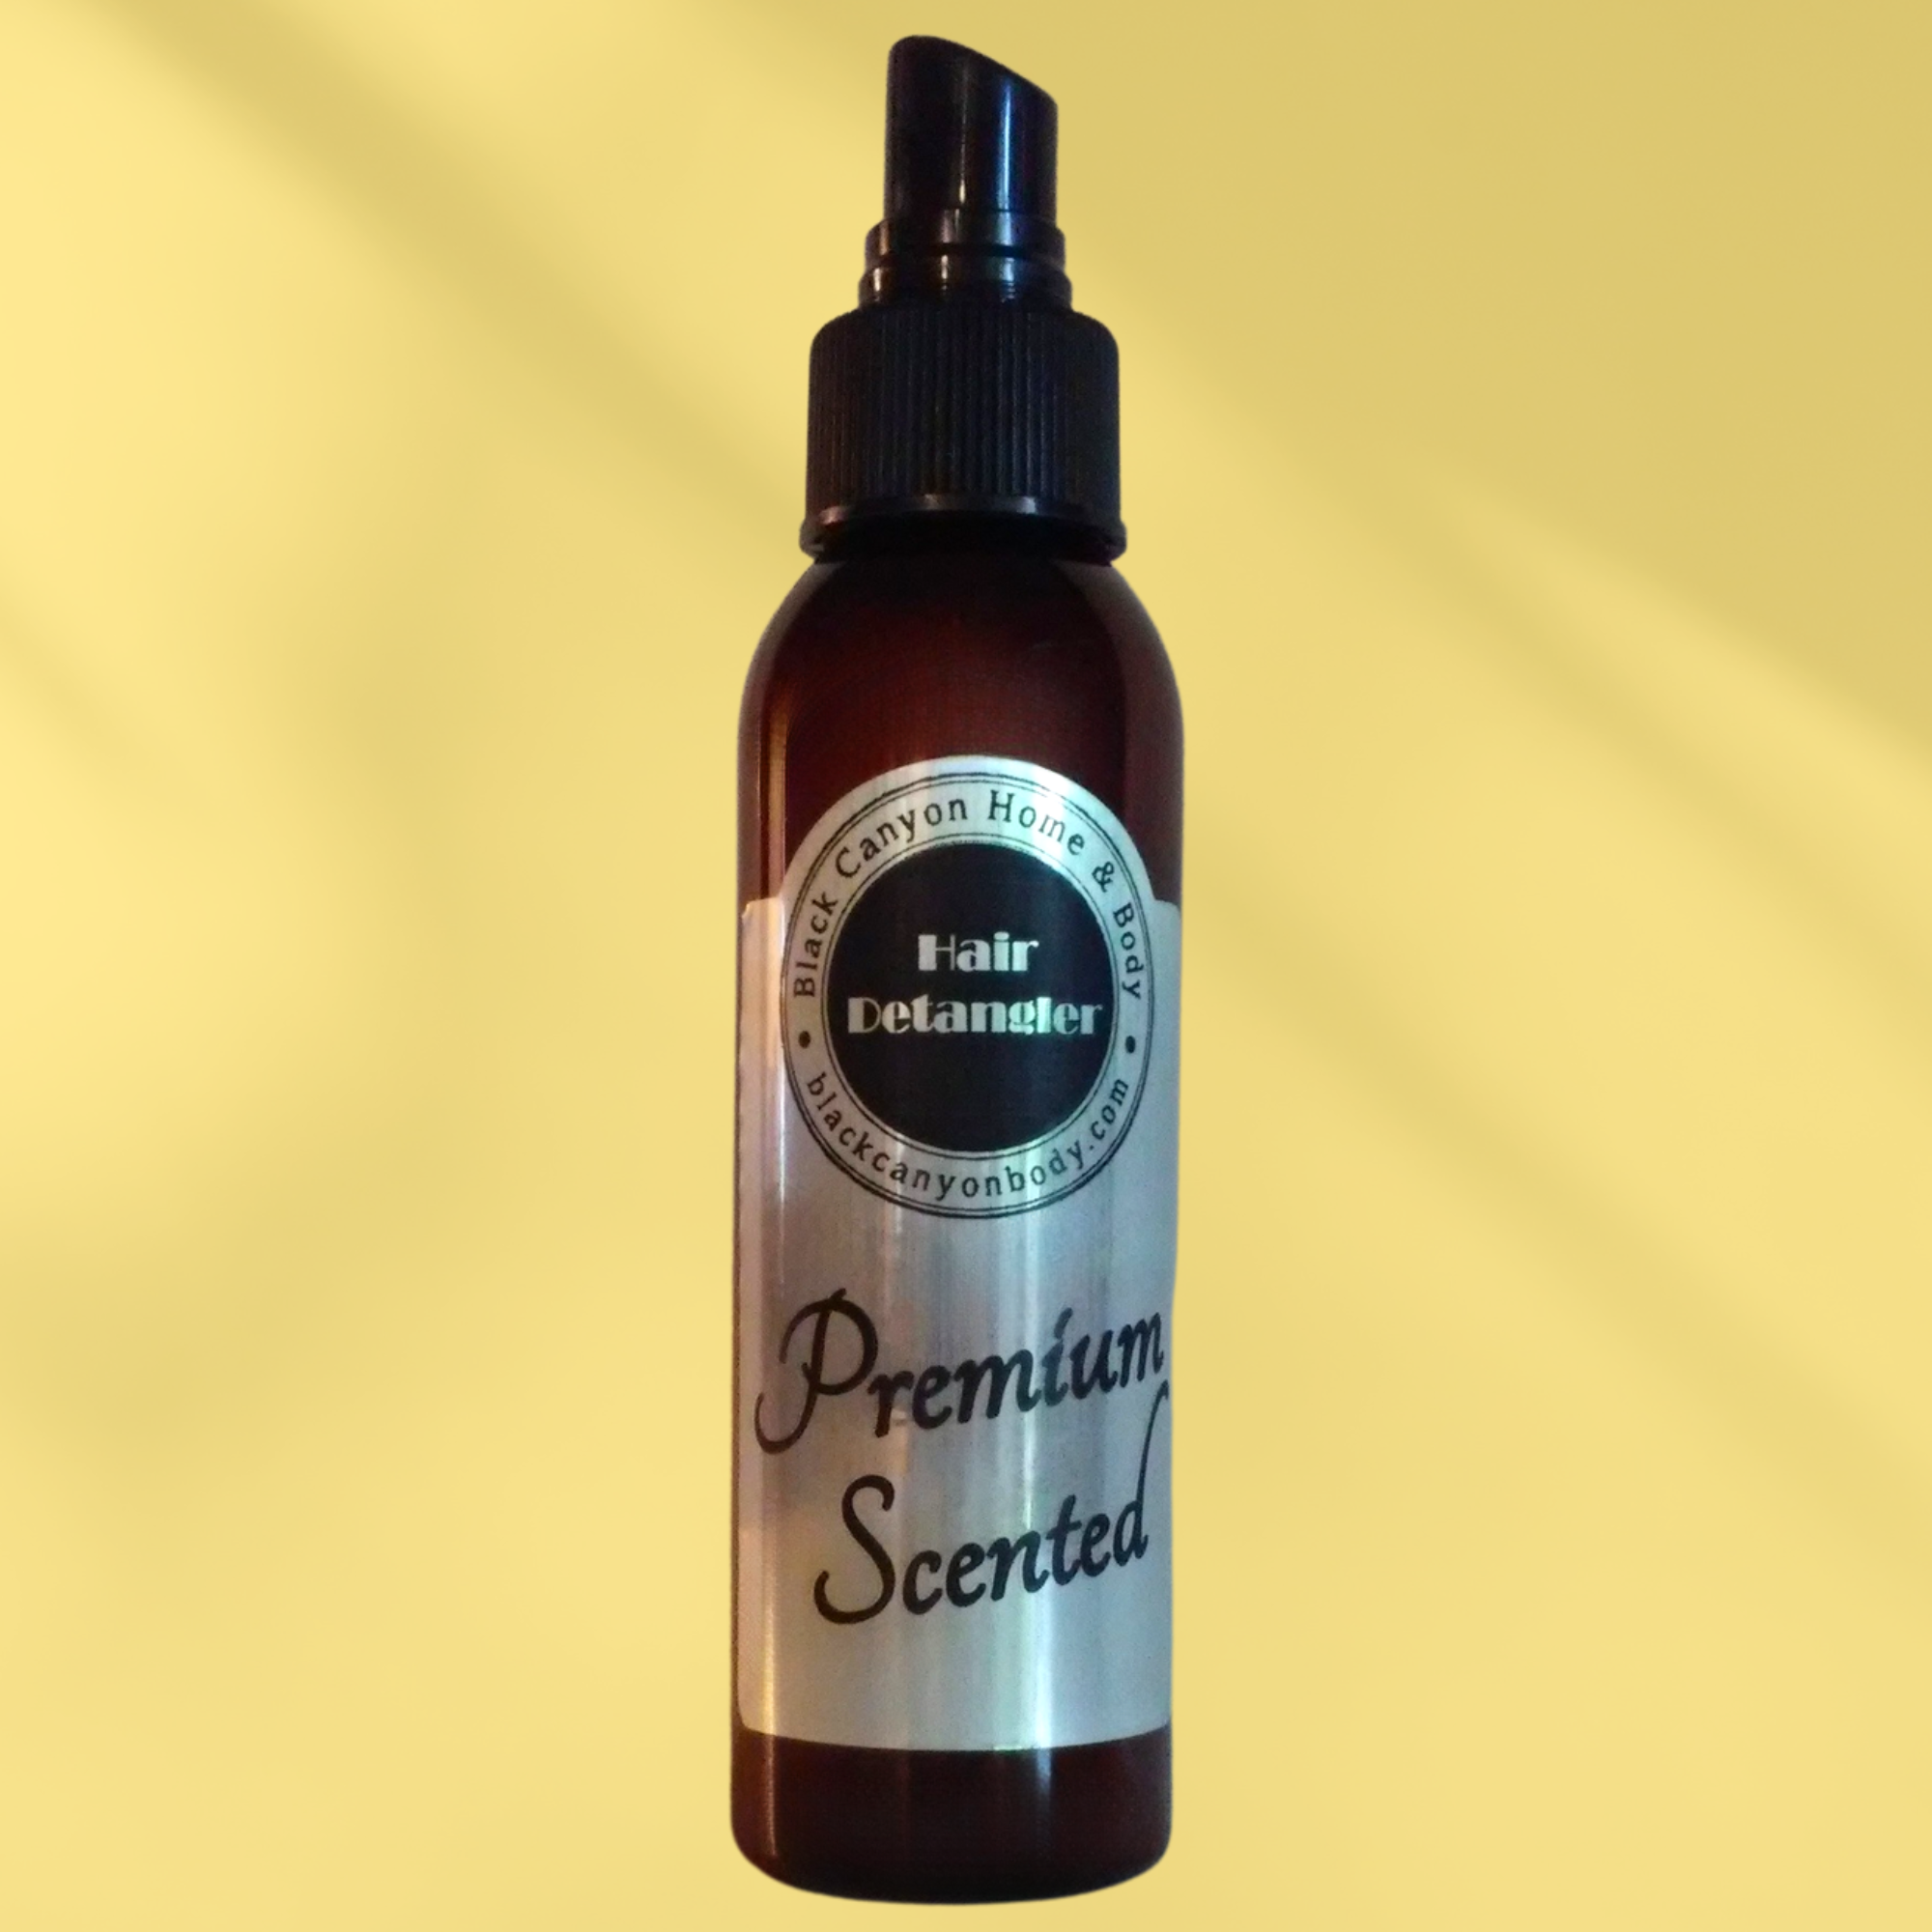 Black Canyon Vanilla Delight Scented Hair Detangler Spray with Olive Oil